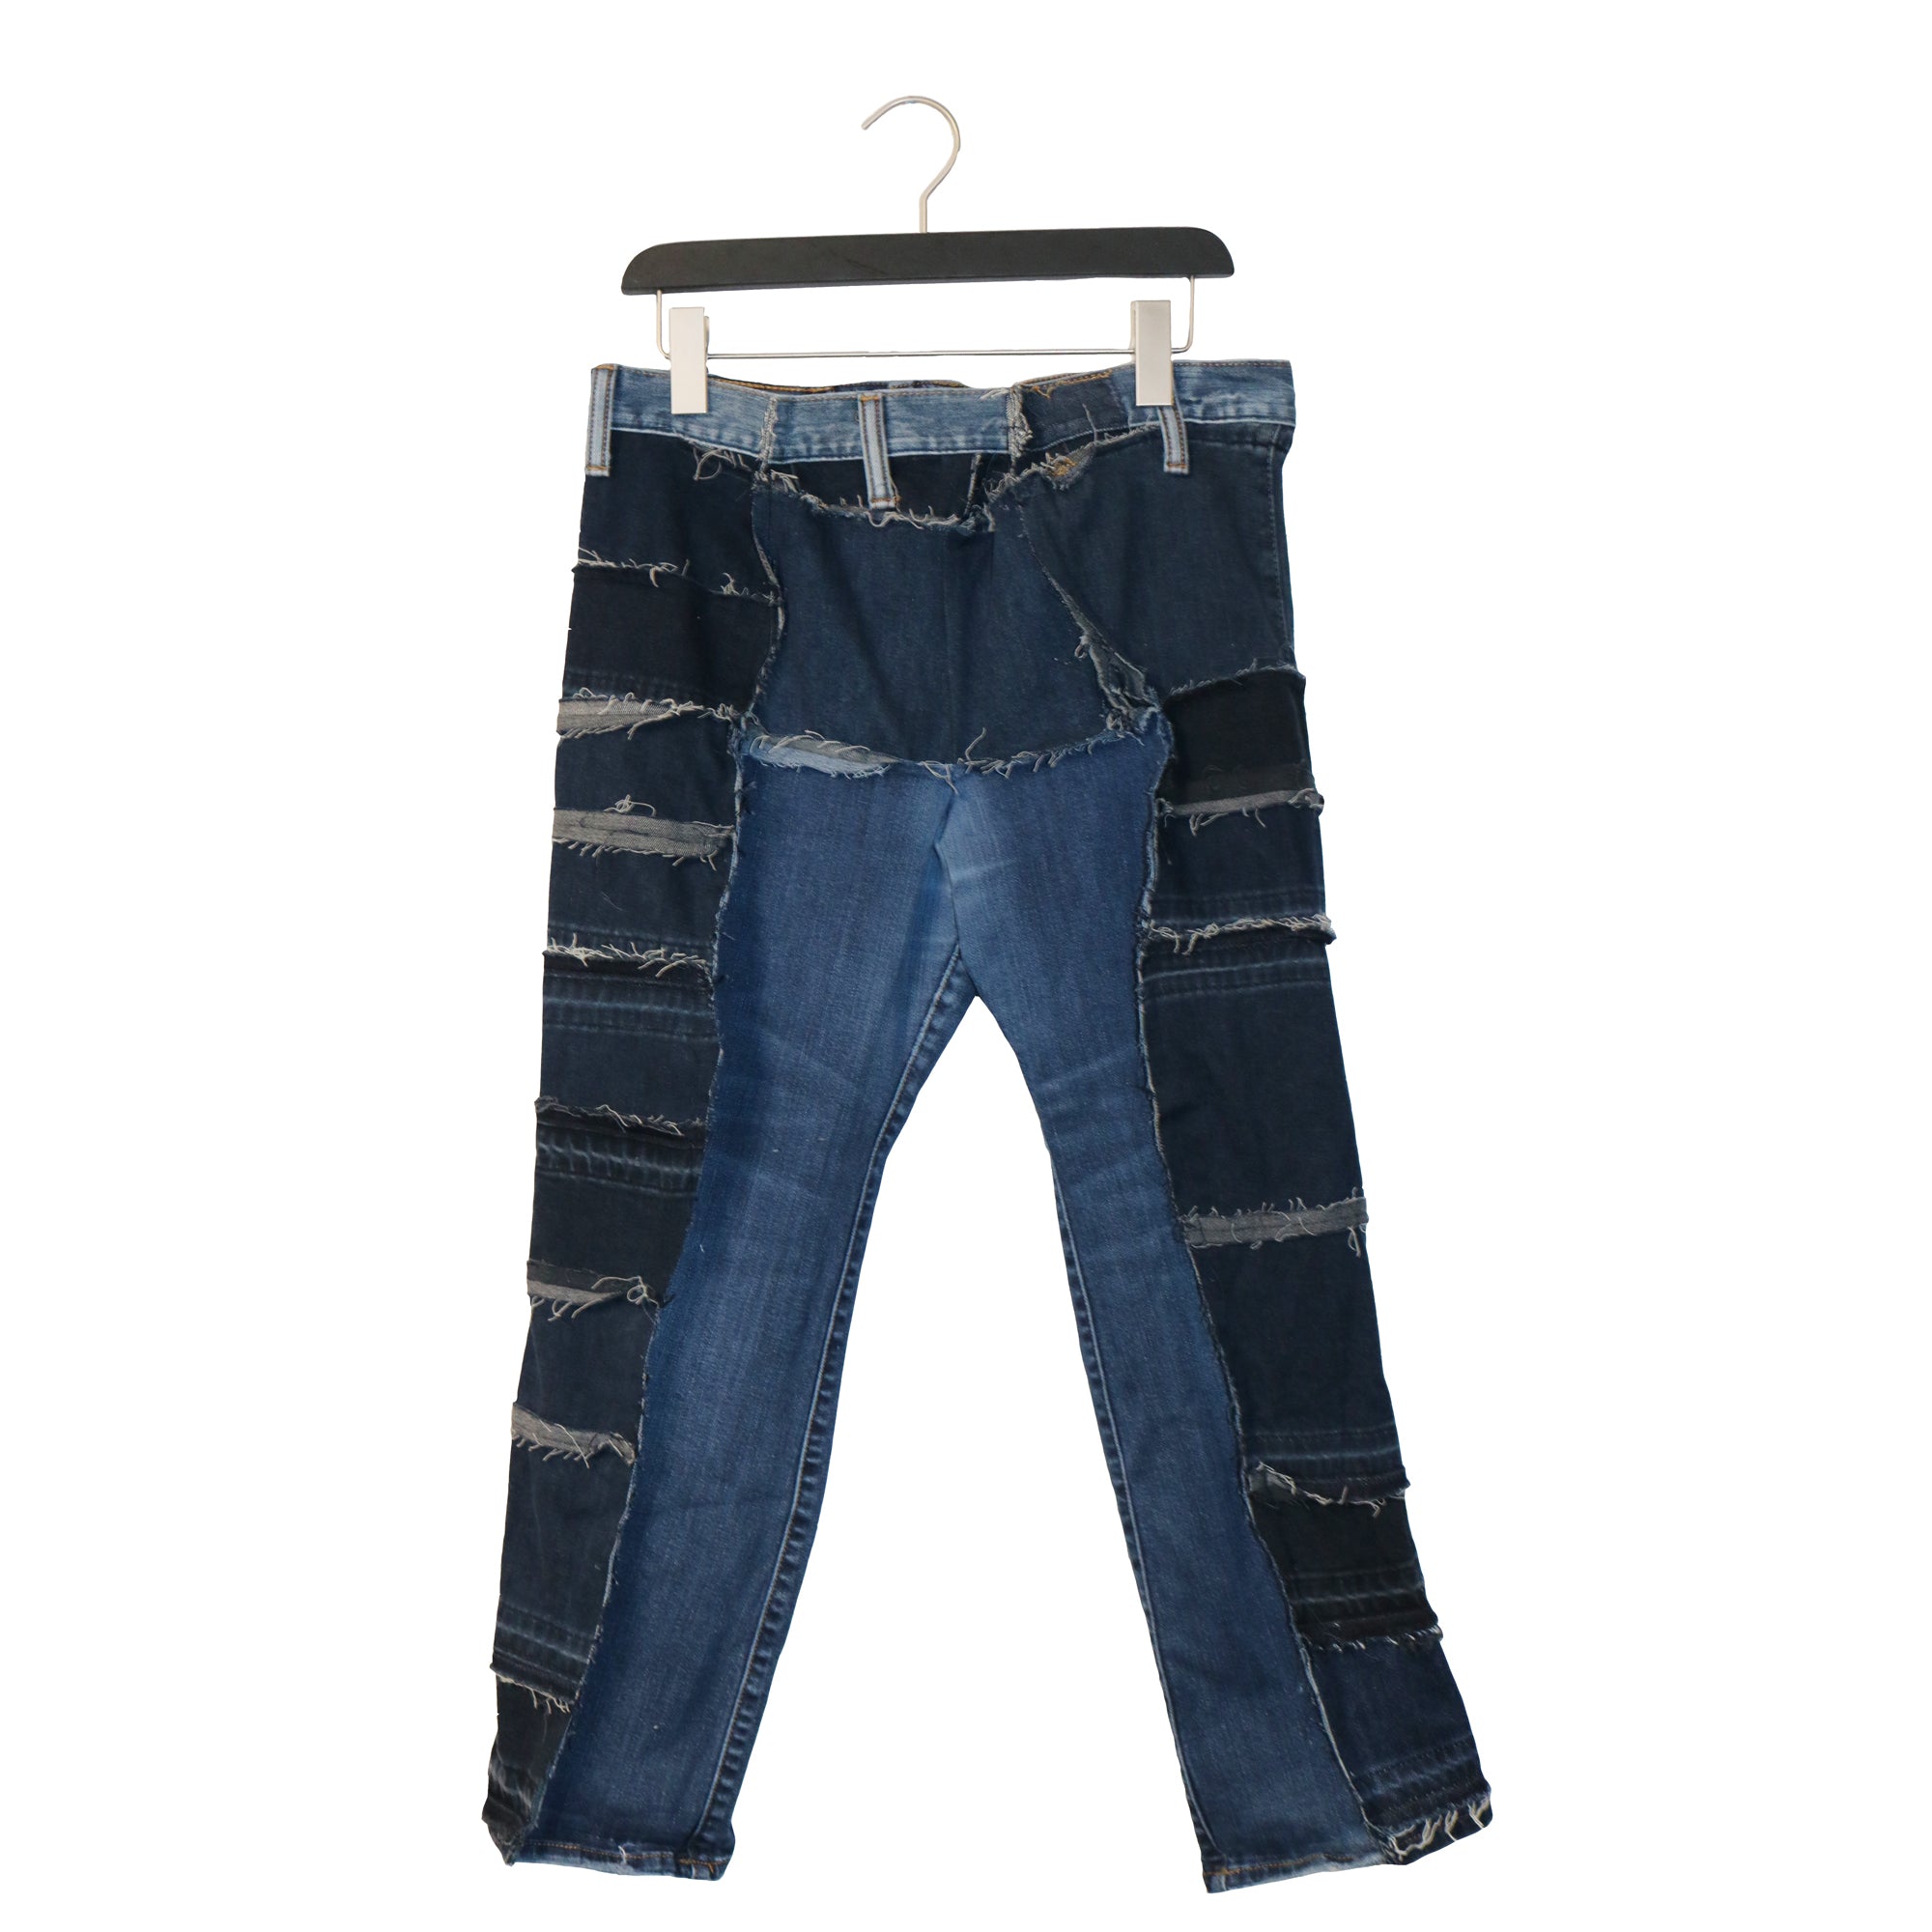 #REMIXbyStevieLeigh eco friendly patchwork jeans